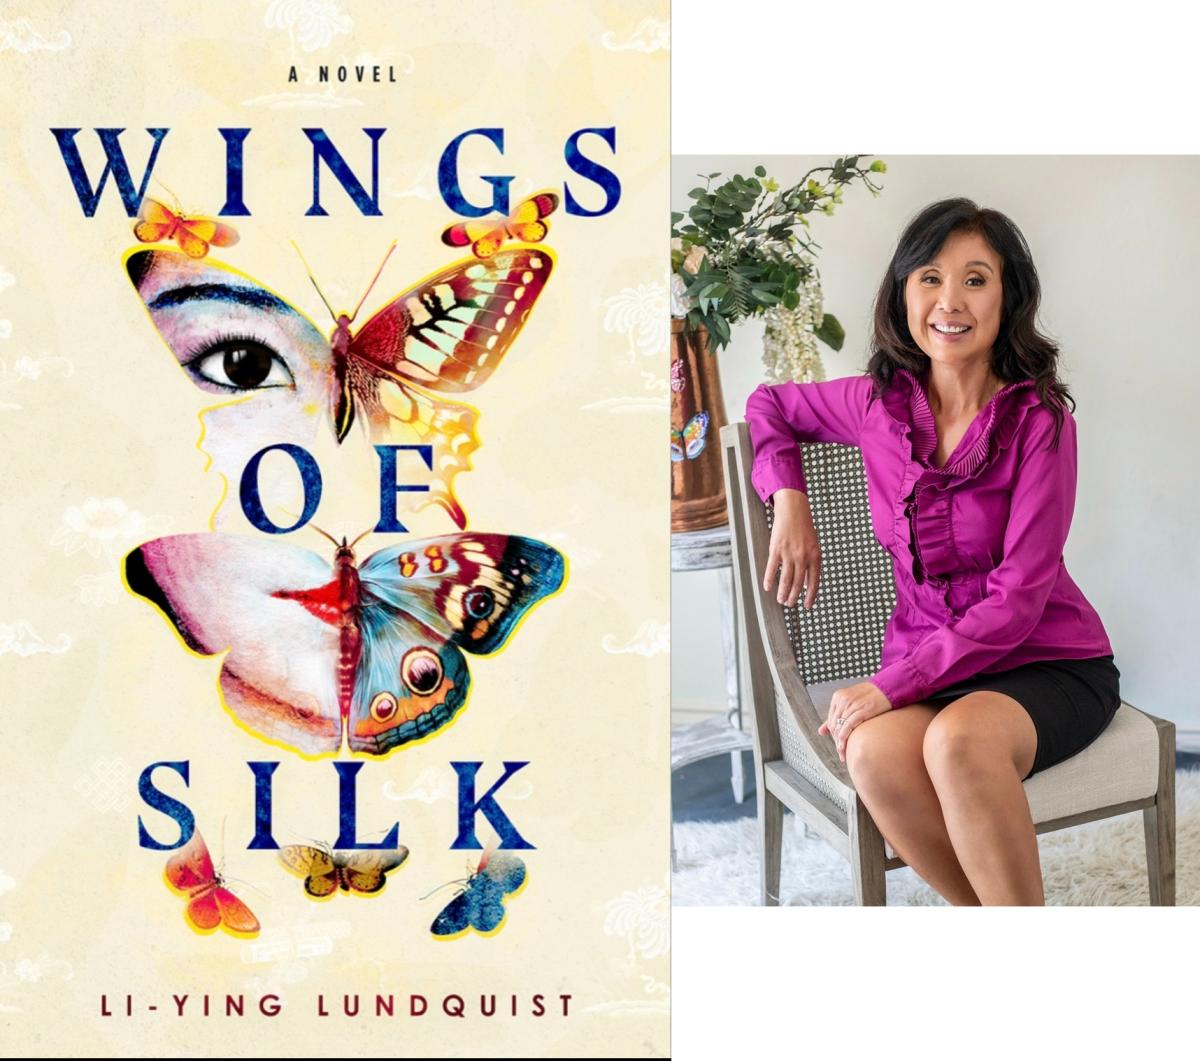 wings of silk title and author